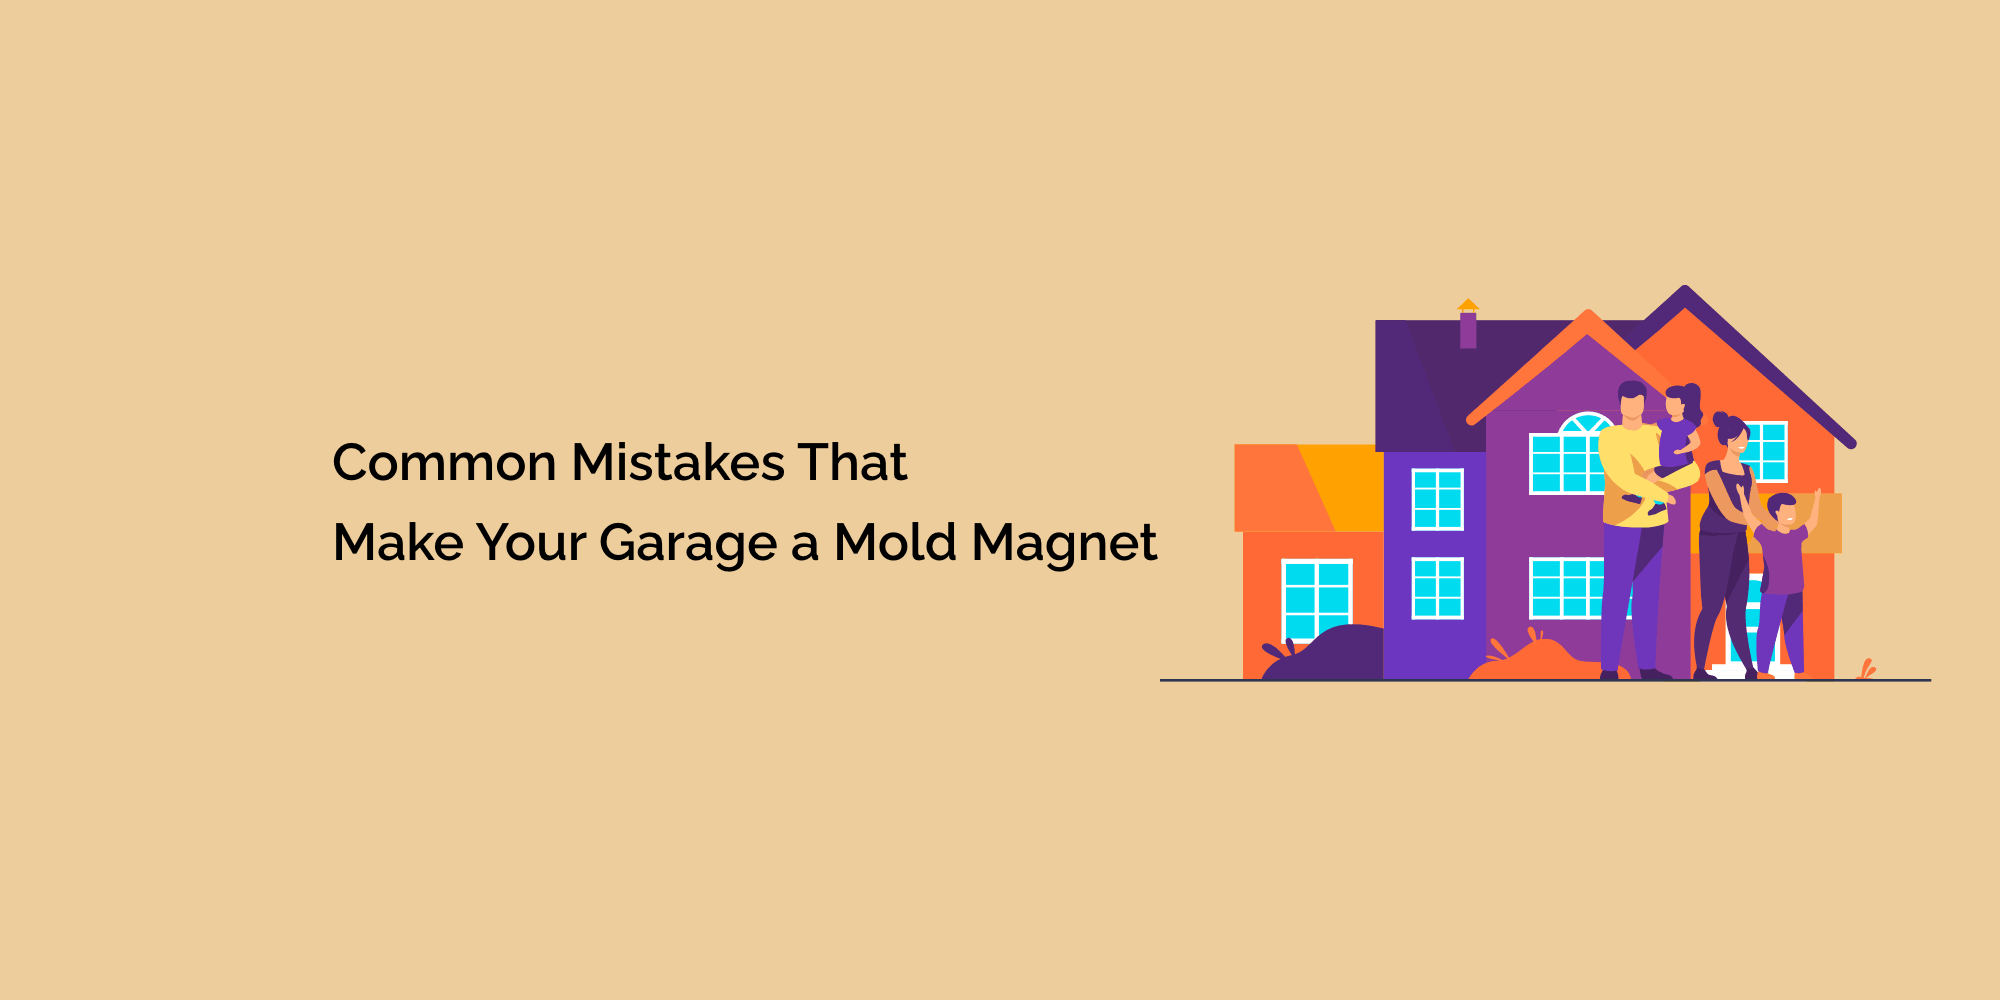 Common Mistakes That Make Your Garage a Mold Magnet